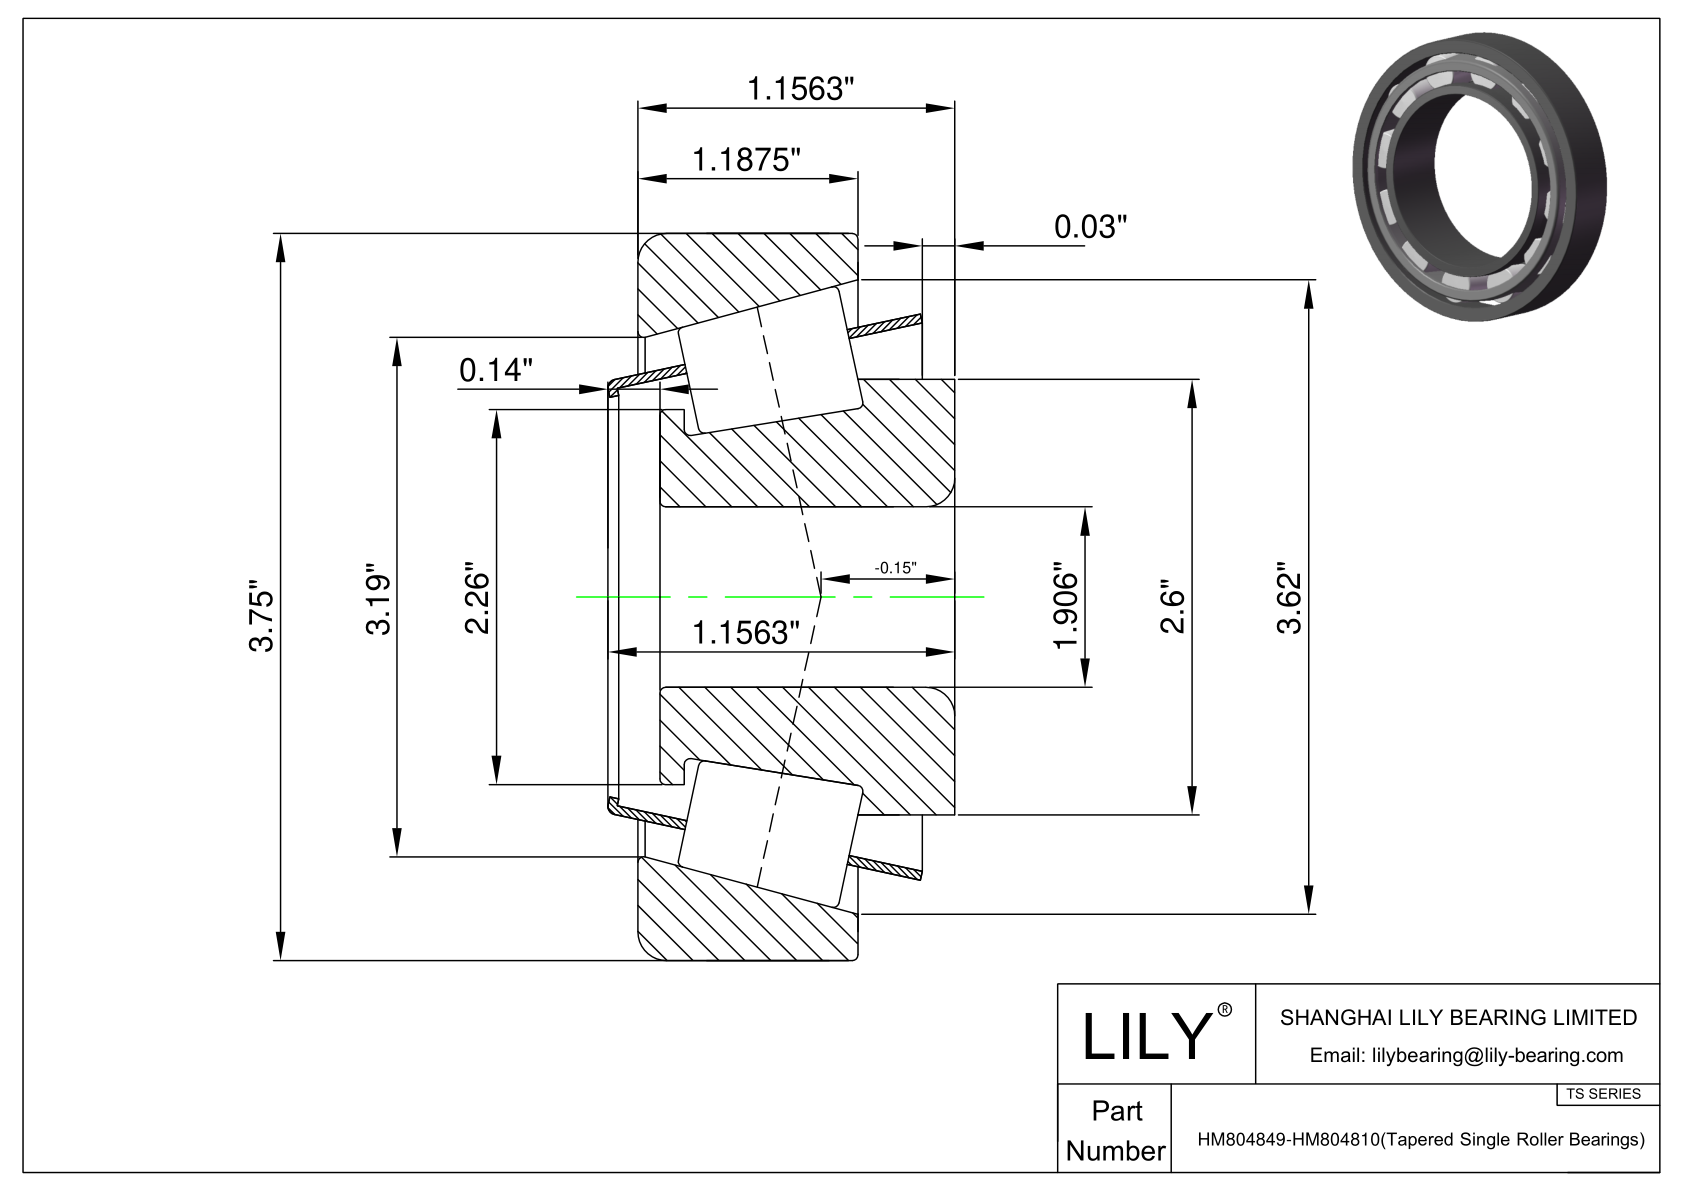 HM804849-HM804810 TS (Tapered Single Roller Bearings) (Imperial) cad drawing